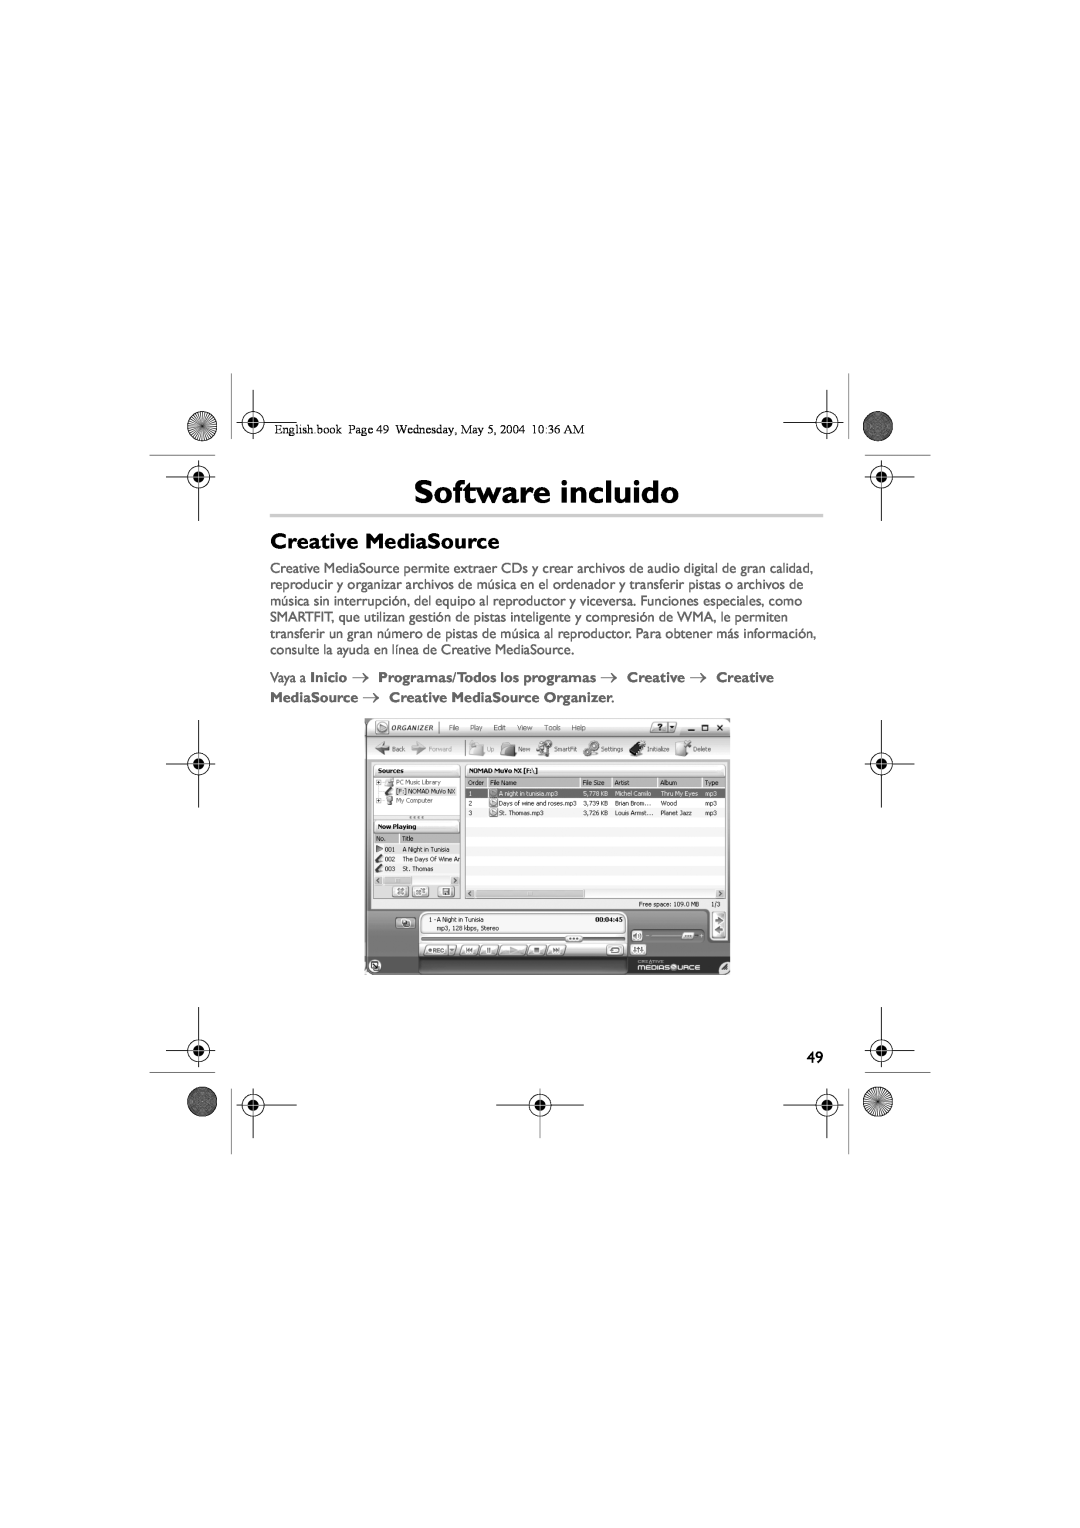 Musica CD Player manual Software incluido, Creative MediaSource, English.book Page 49 Wednesday, May 5, 2004 1036 AM 